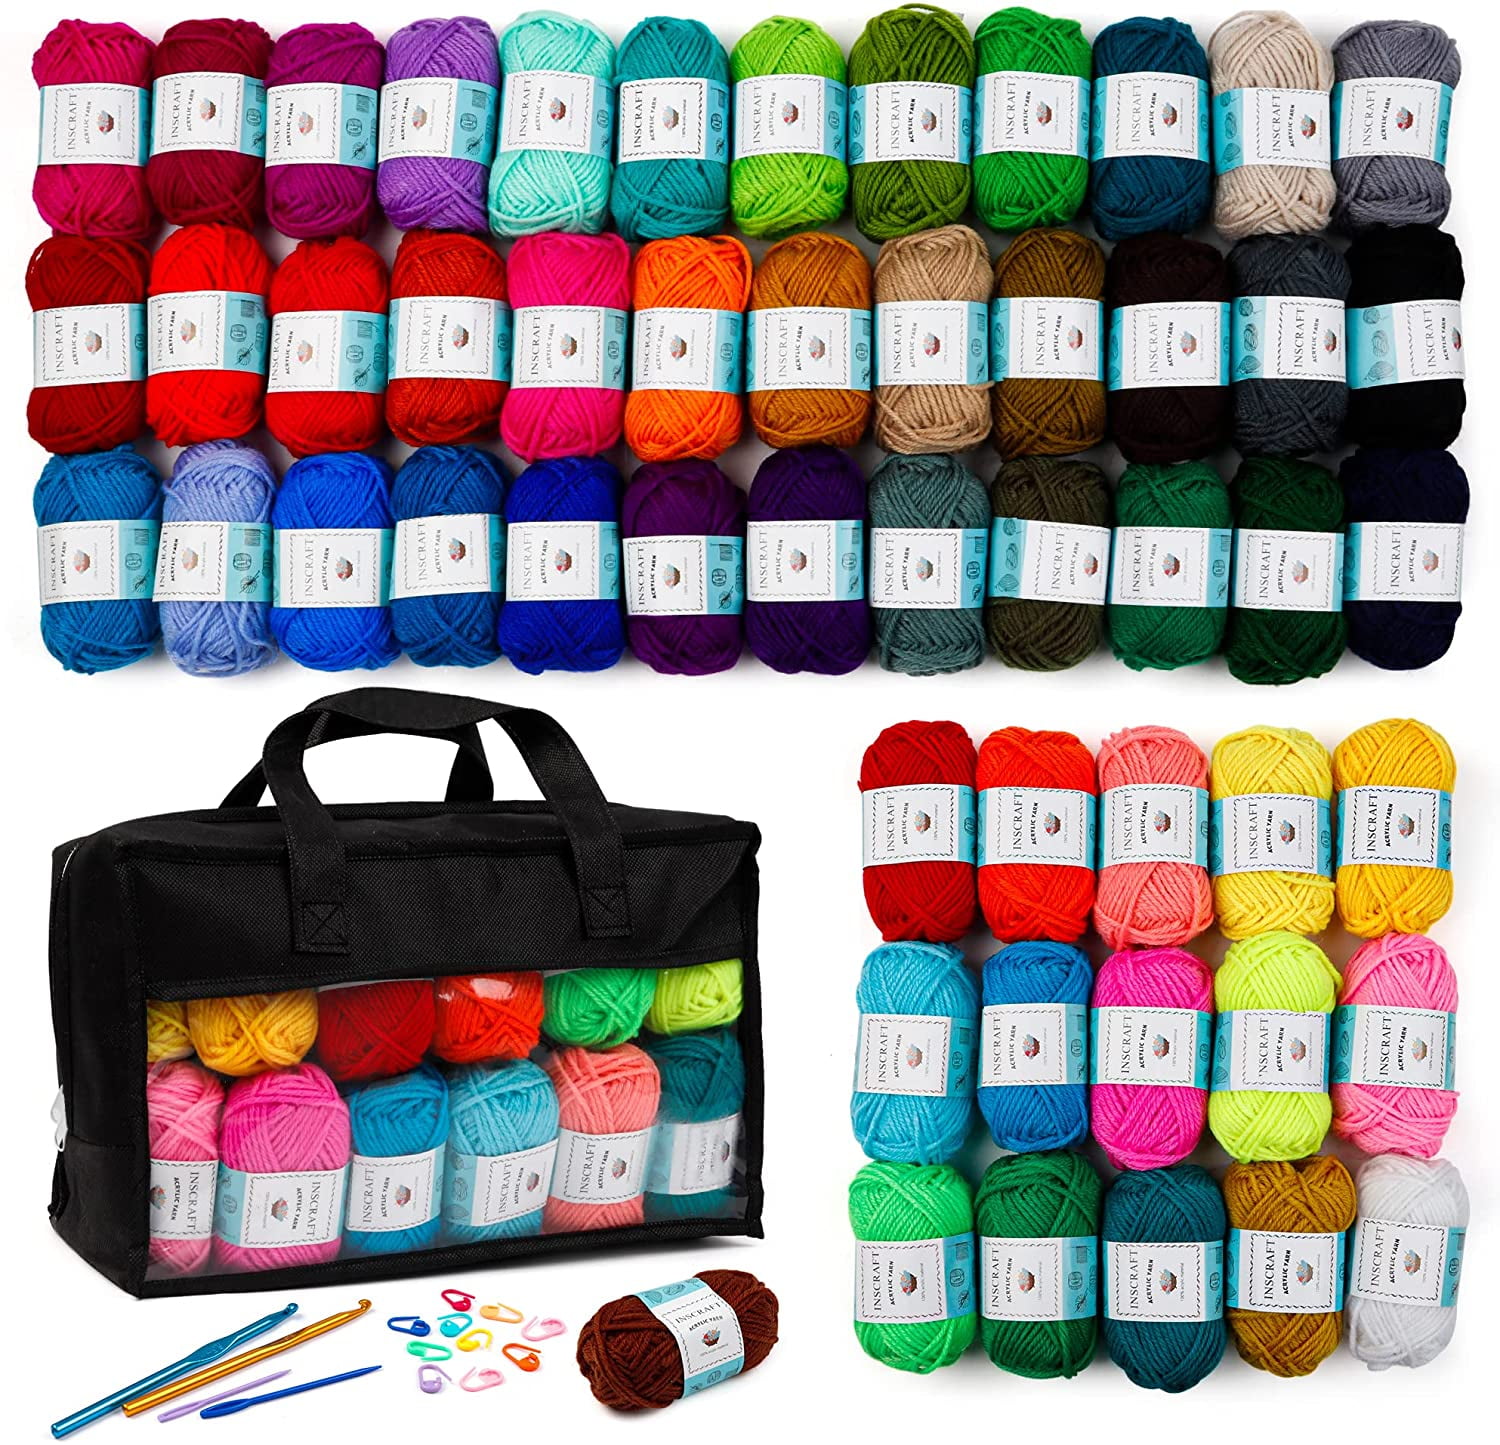 Inscraft Crochet Yarn Kit for Beginners Adults and Kids, Includes 1650 Yards 30 Colors Acrylic Skeins, User Manual, Hooks, Pink Bag et